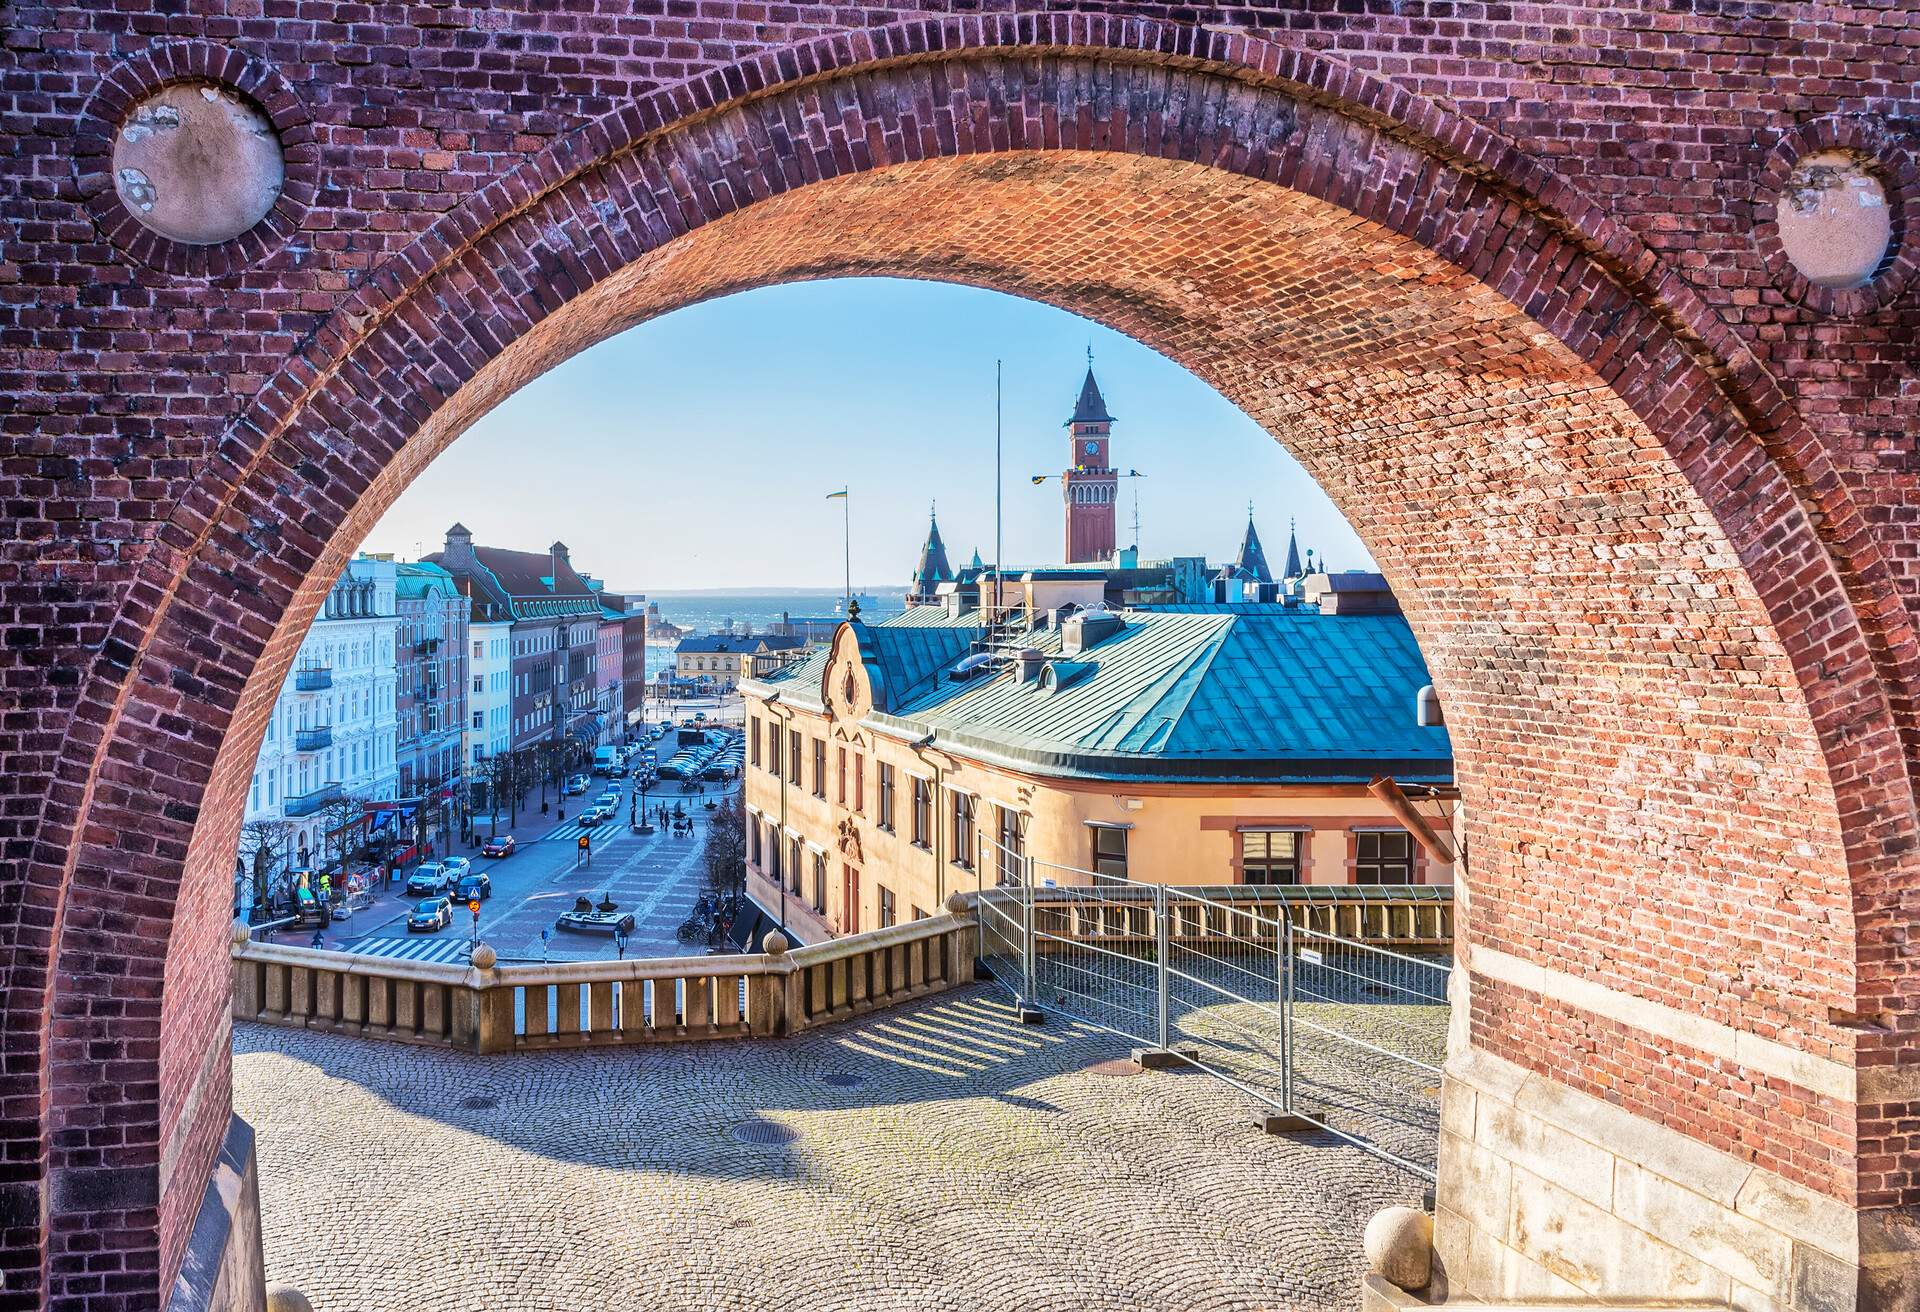 A brick archway leading to a terrace overlooking a bustling city street.